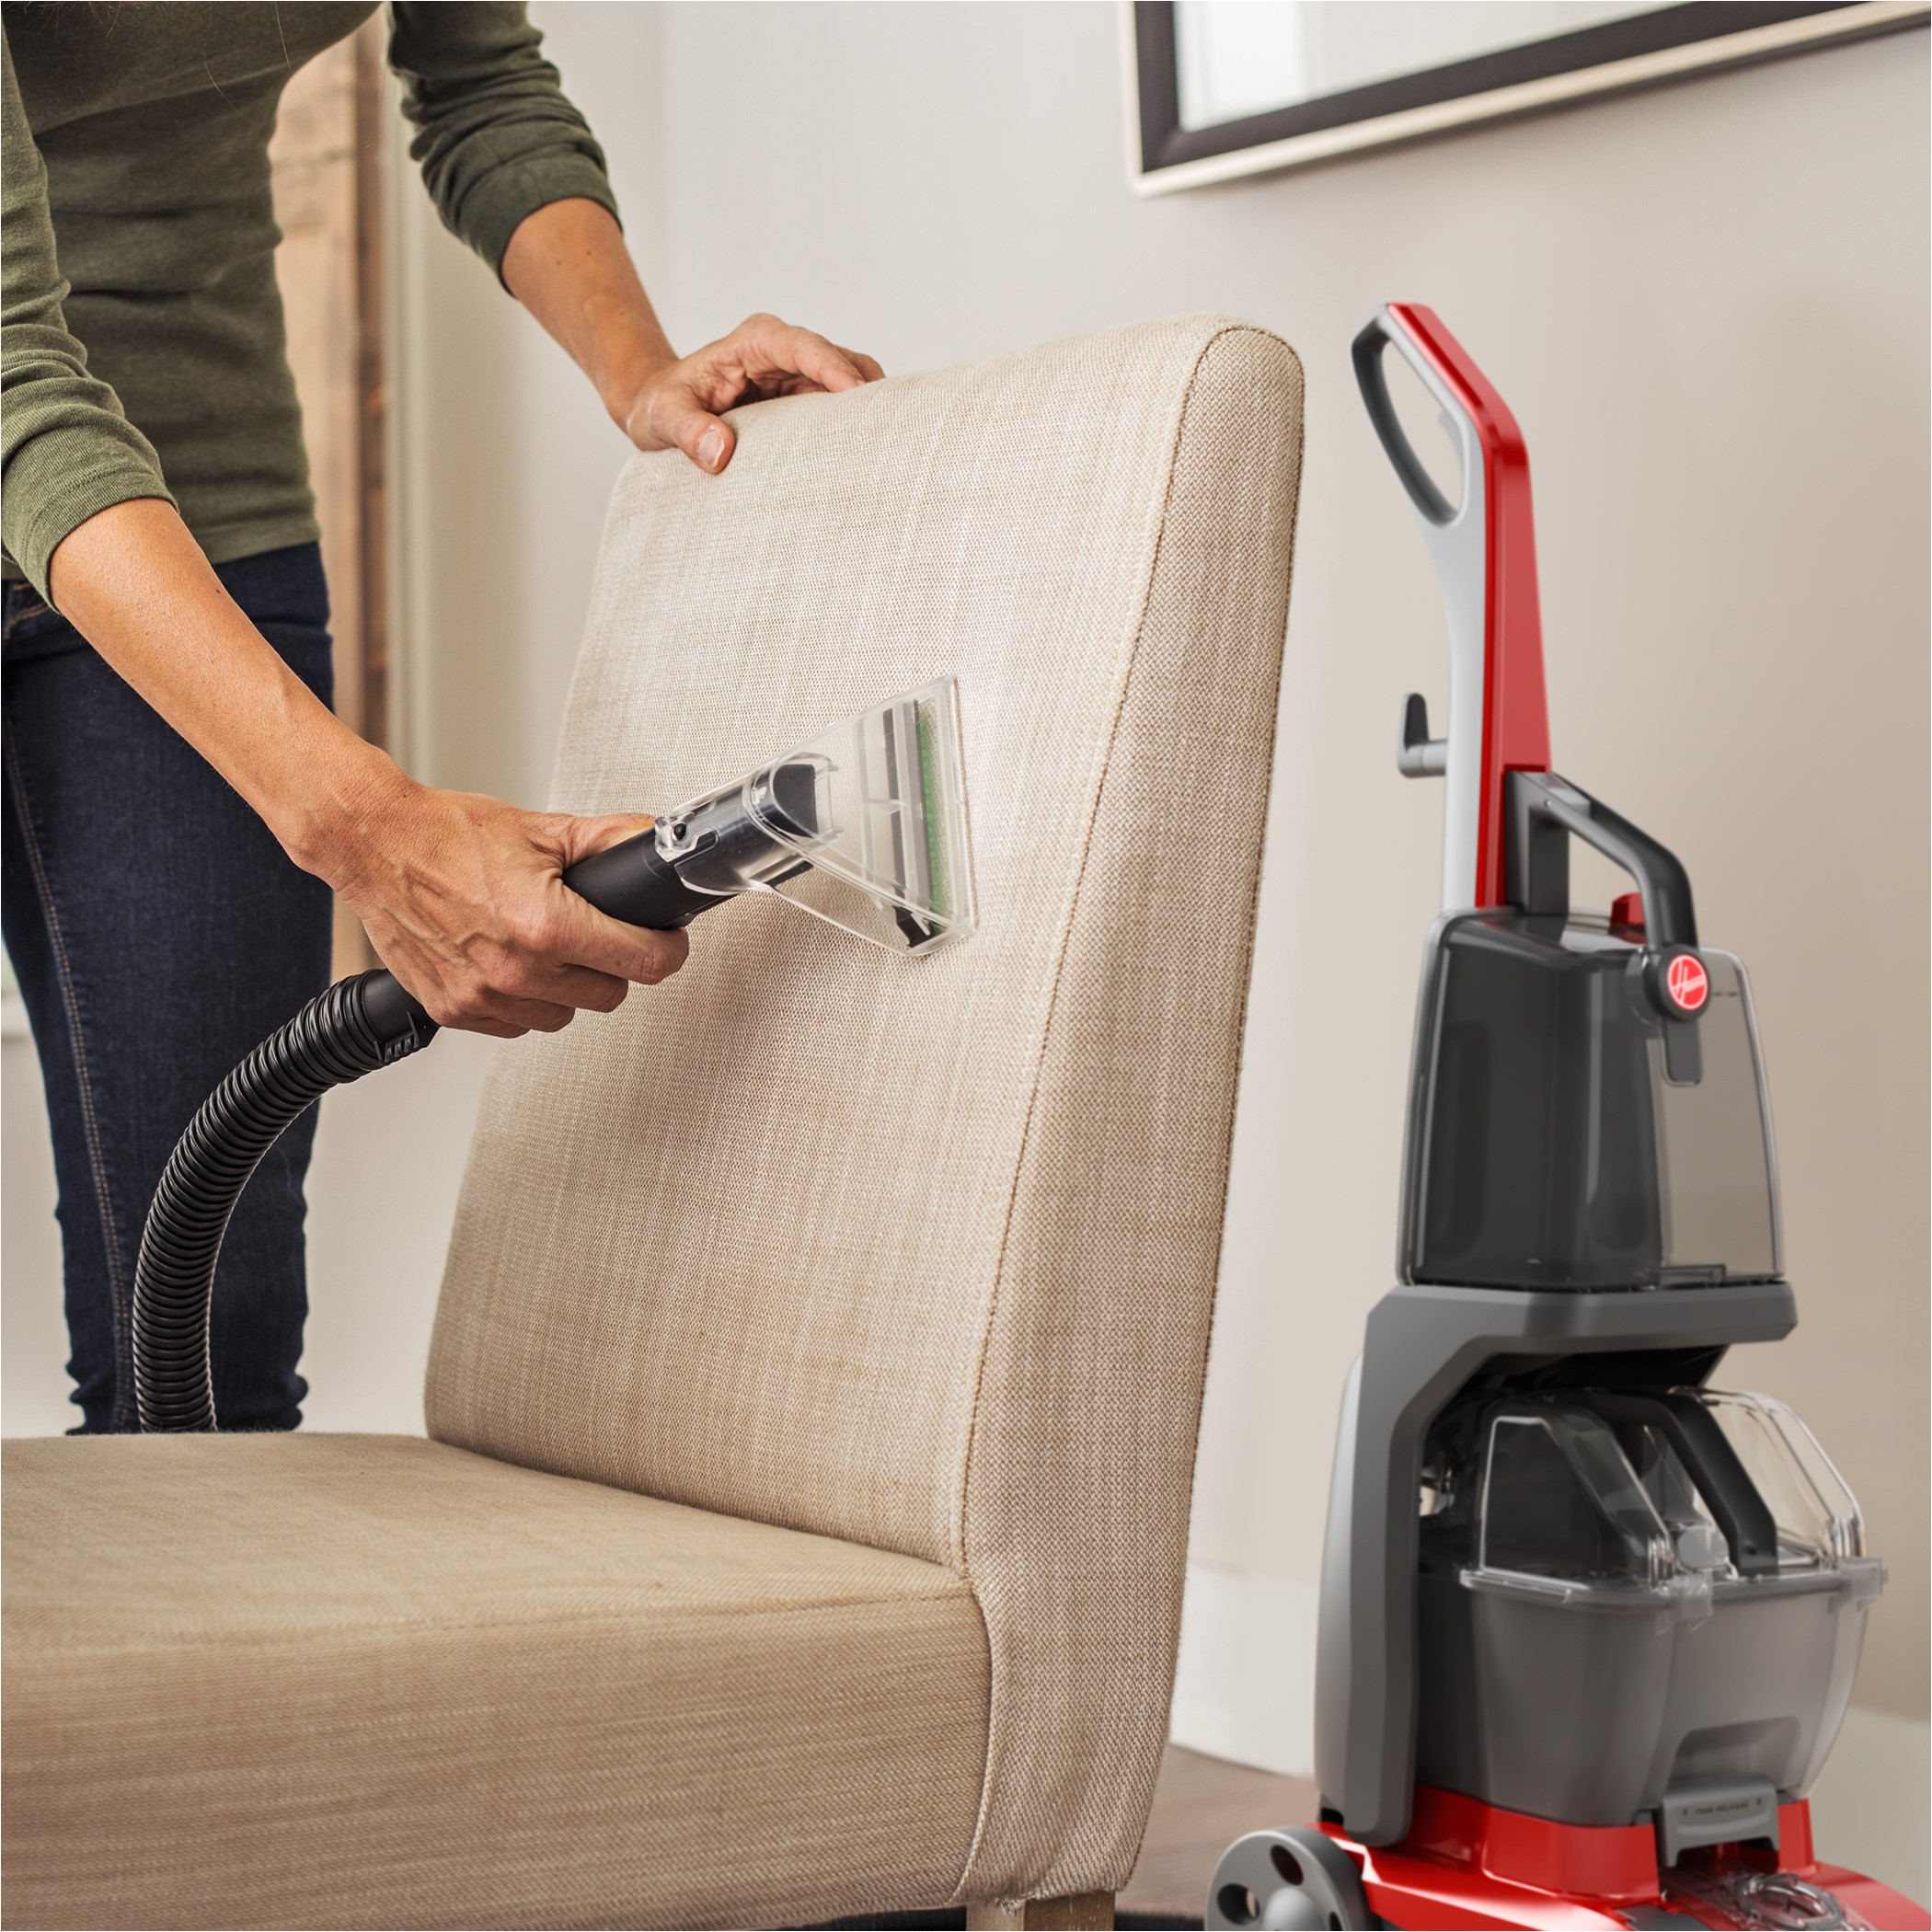 Personal touch Carpet and Floor Care Hoover Power Scrub Carpet Cleaner W Spinscrub Technology Fh50135